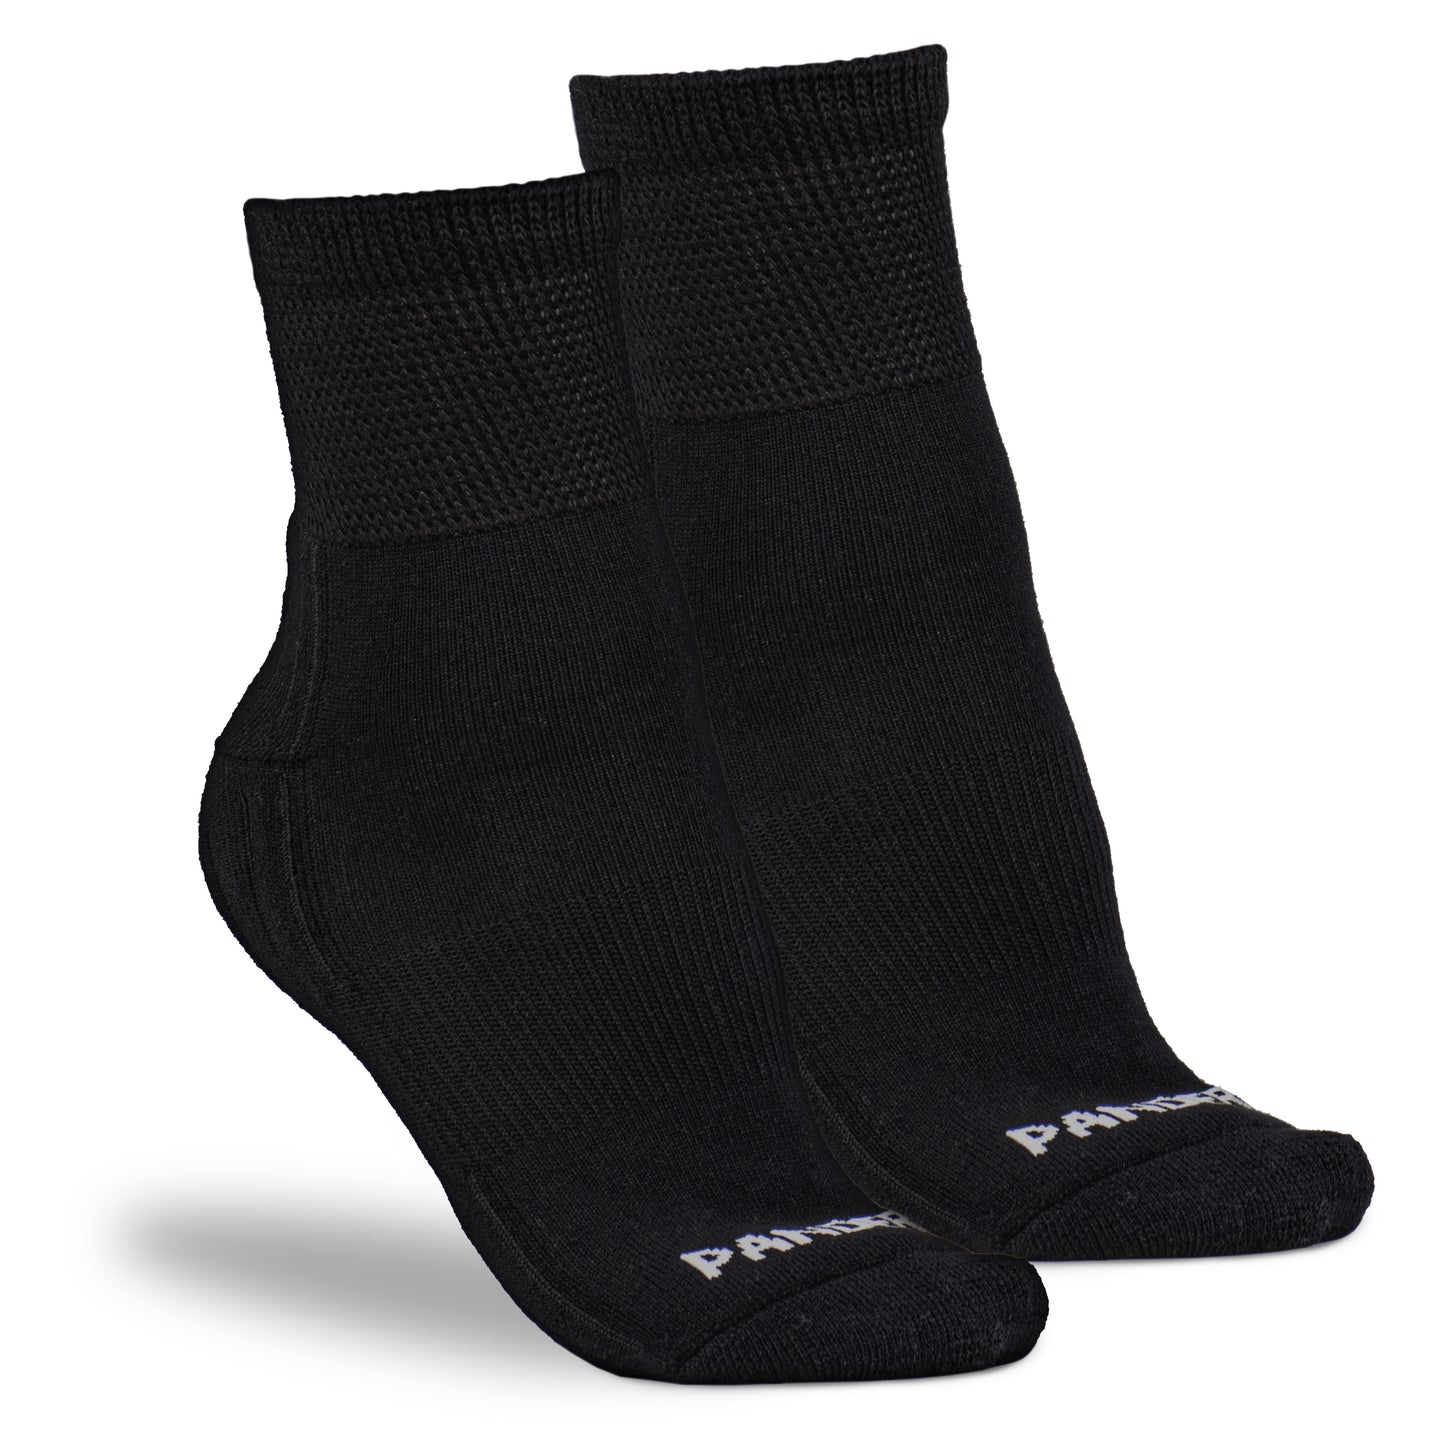 PANDERE Ankle Socks with Relaxed Fit Tops - Bundle of 3 pair